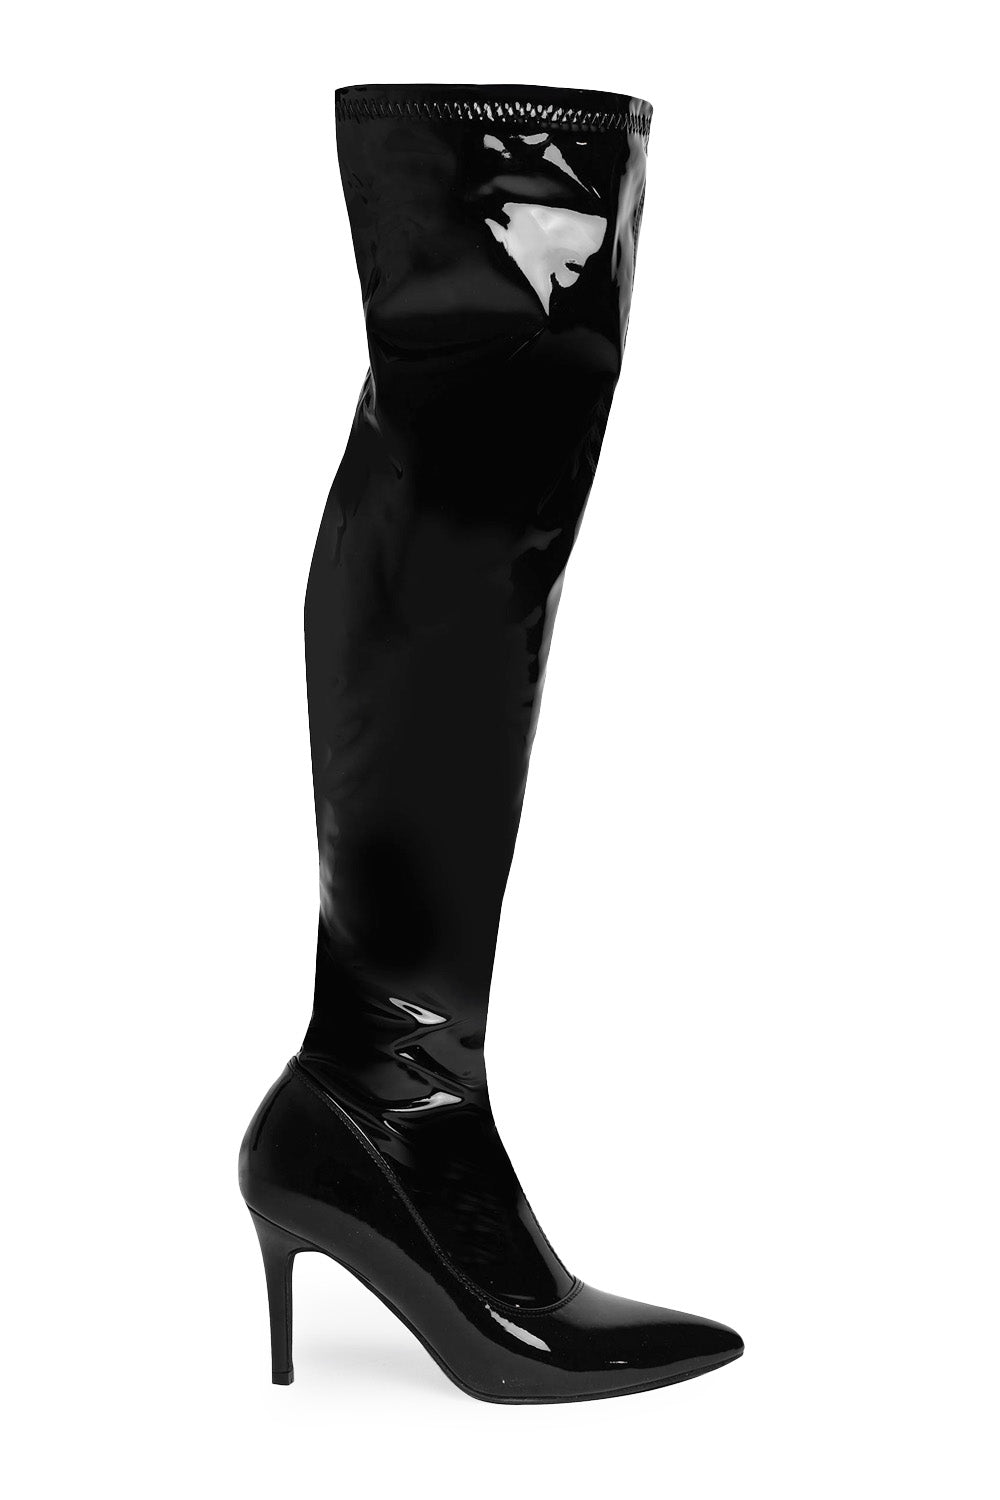 LEXI OVER THE KNEE BOOTS WITH STILETTO HEELS IN BLACK PATENT FAUX LEATHER